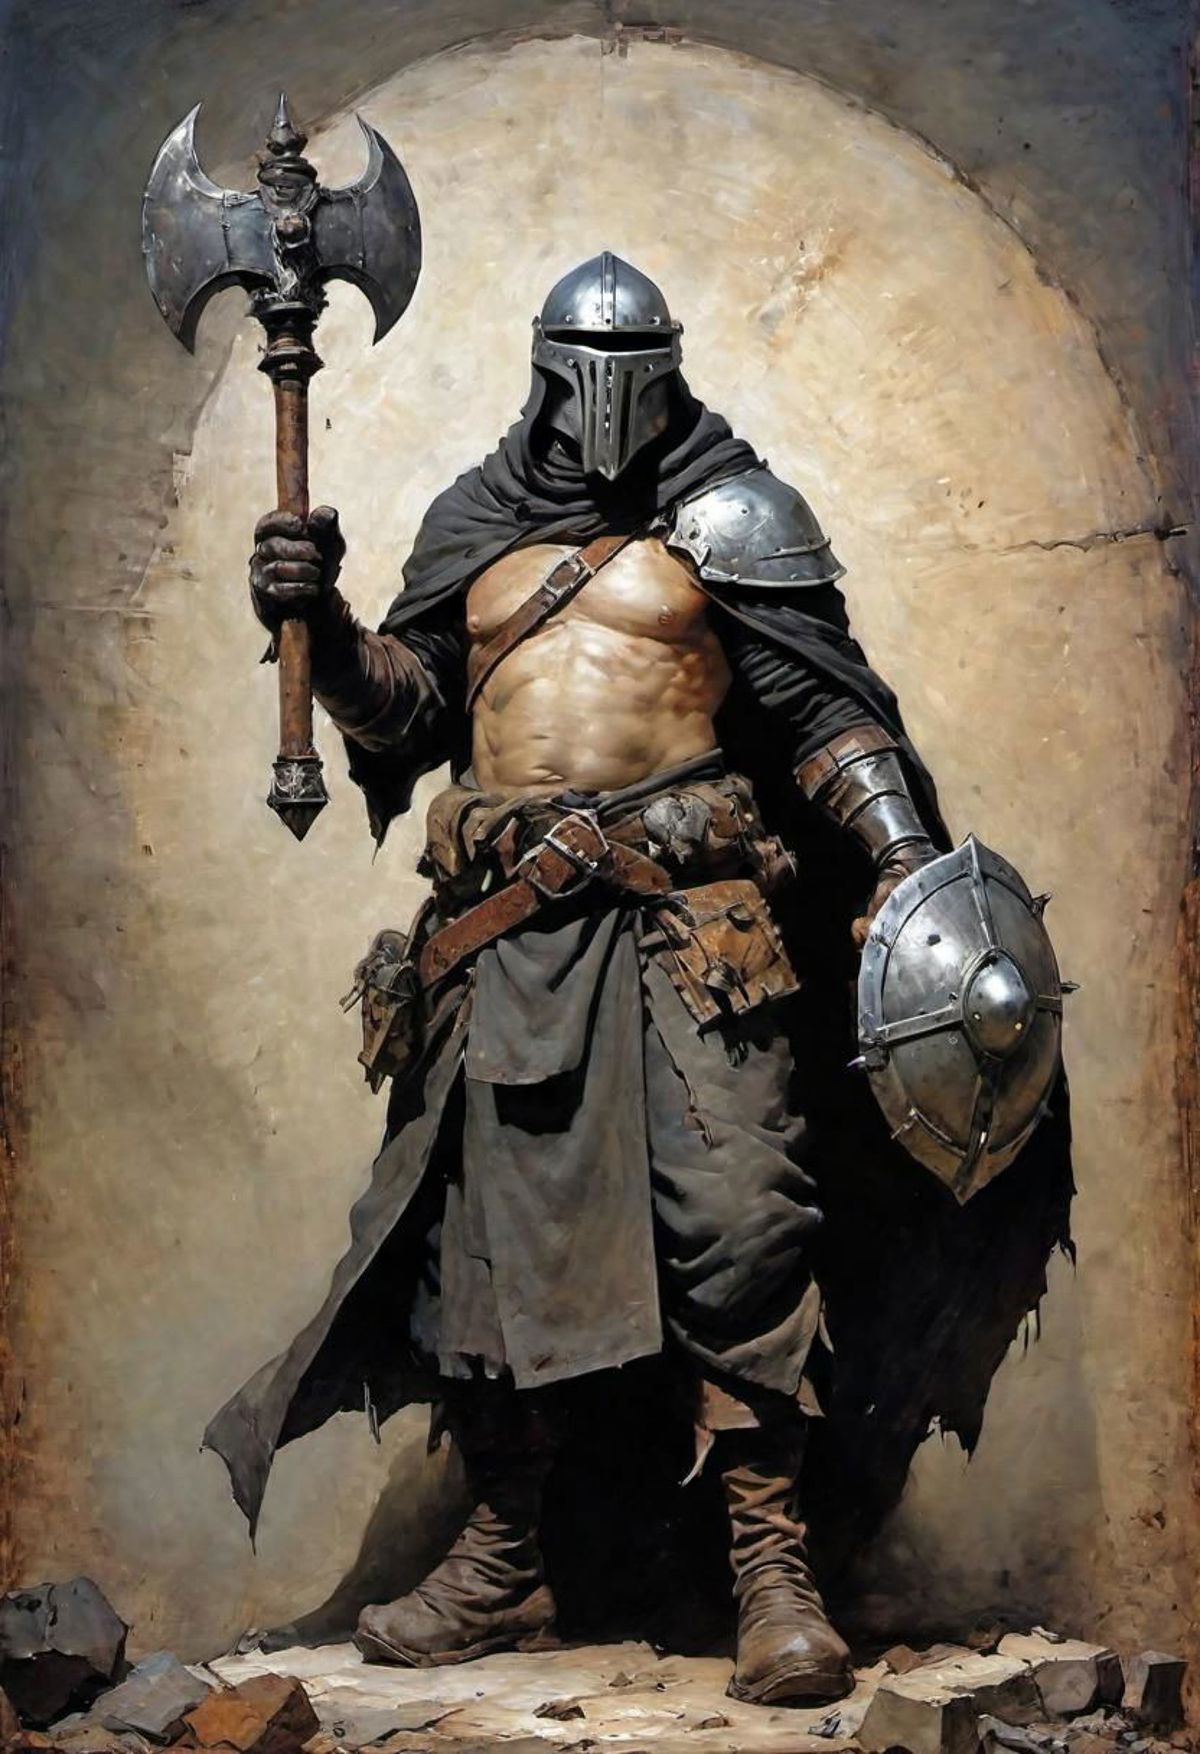 A Warrior with a Shield and Axe in Hand.